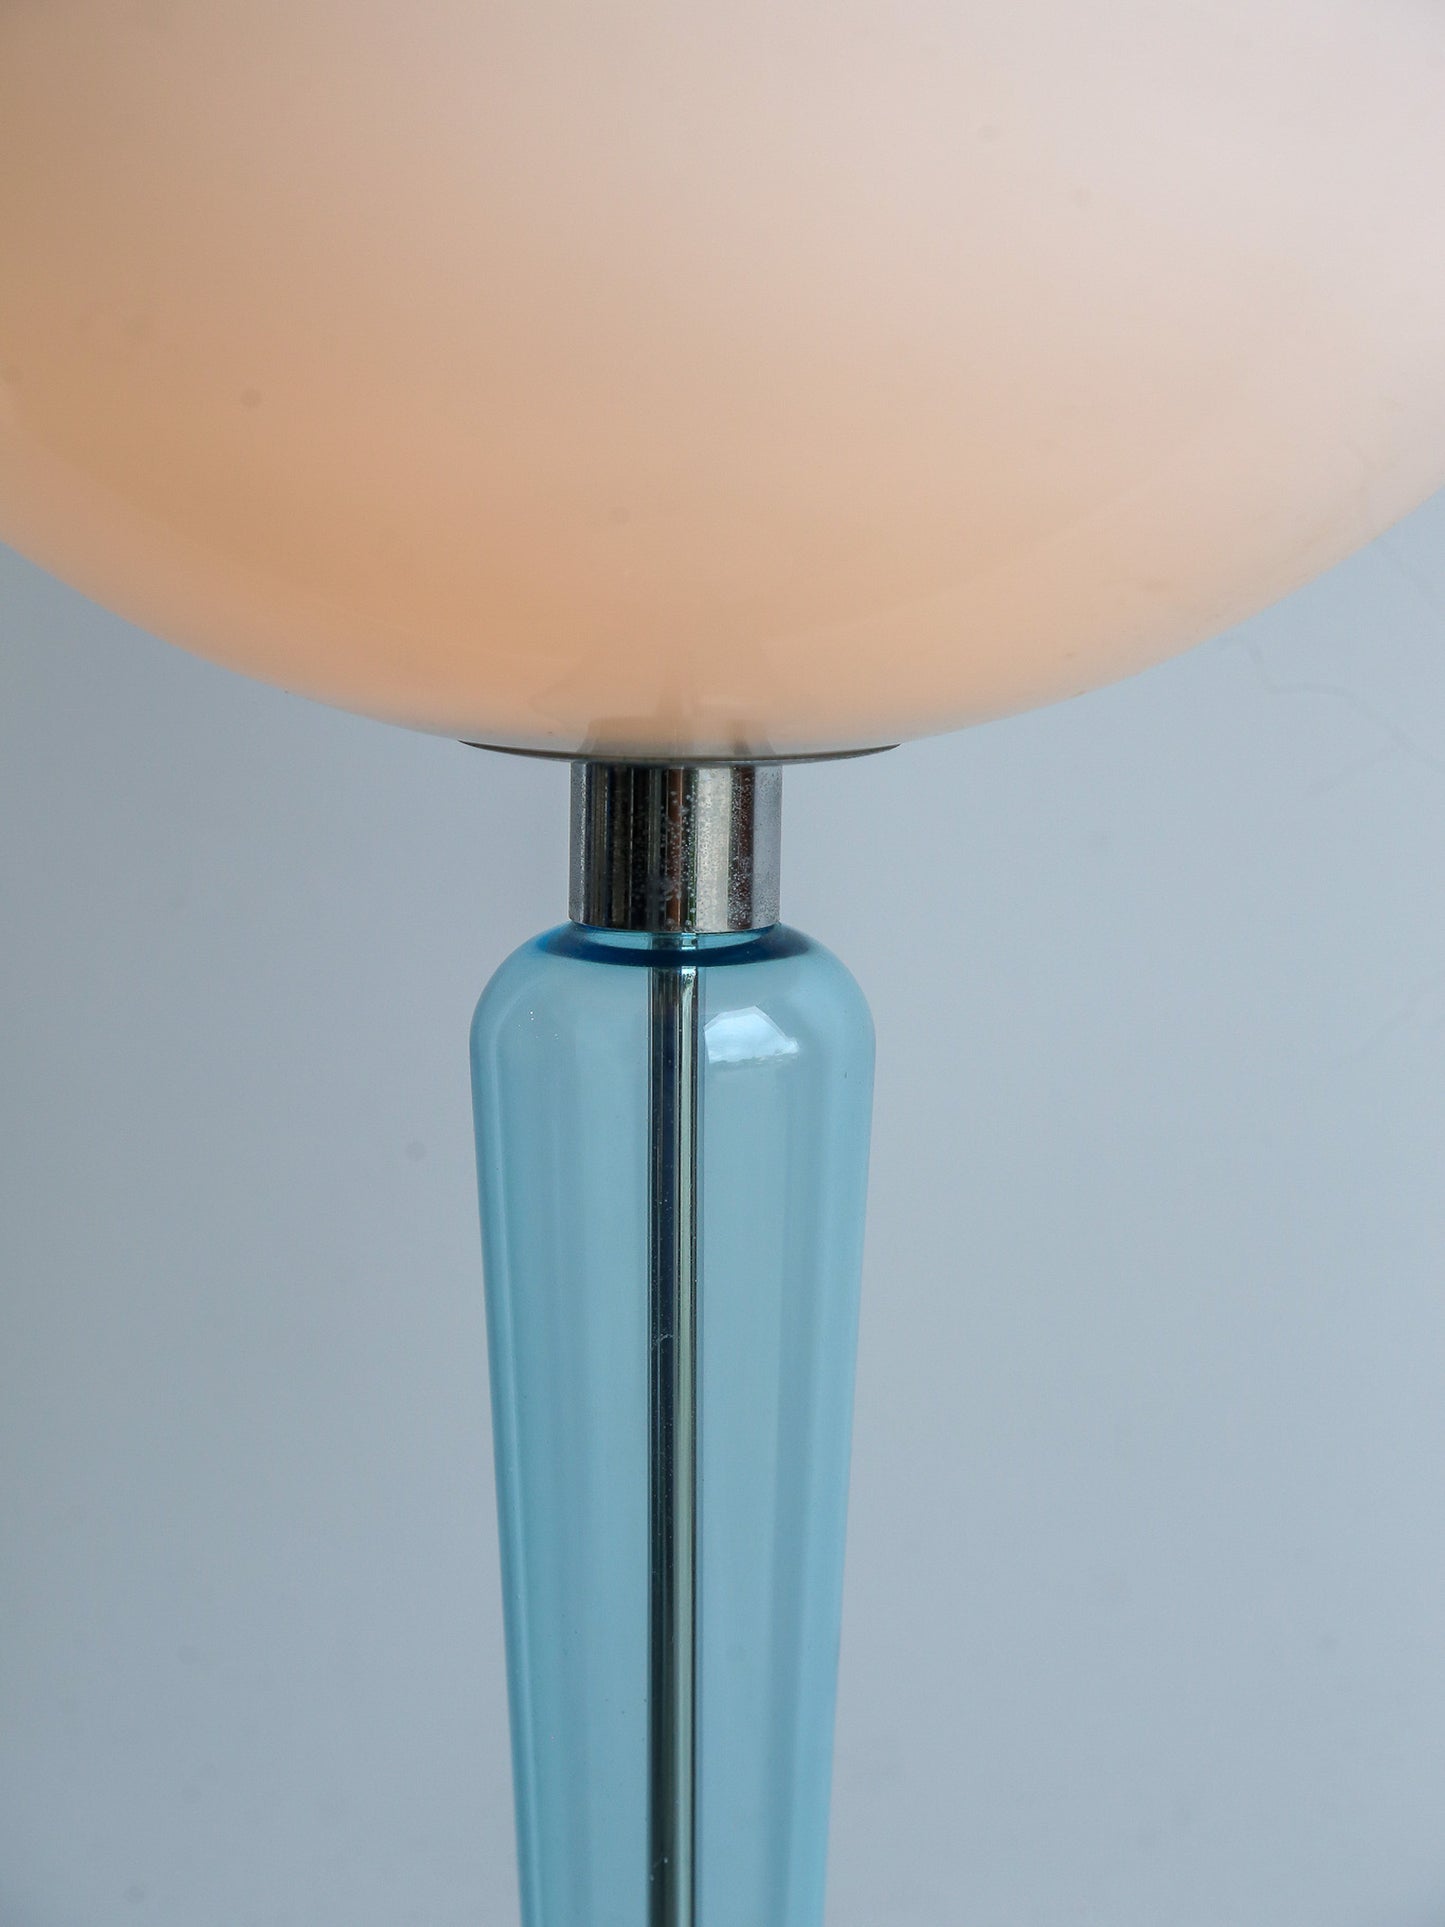 Coppa Table Lamp by Jeannot Cerruti for Ve-Art